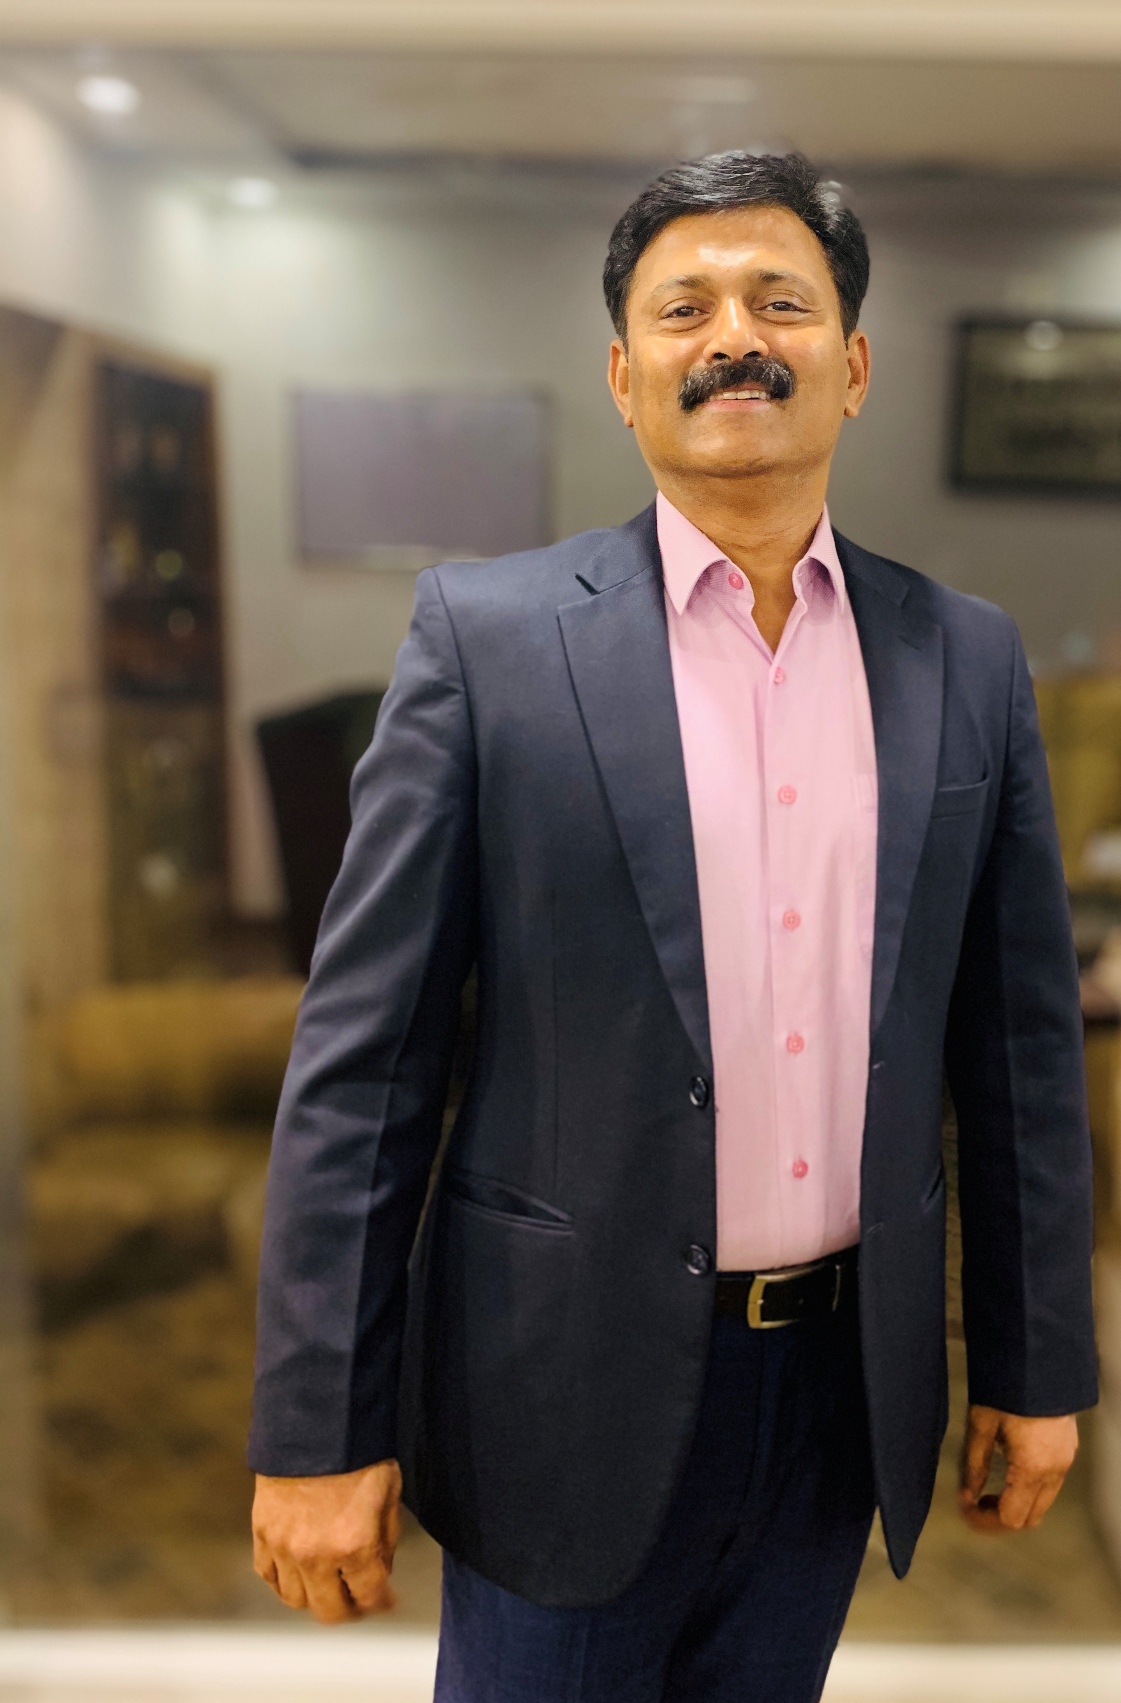 wheebox-appoints-microsoft-cloud-and-annuity-business-lead-as-chief-revenue-officer-for-india-business